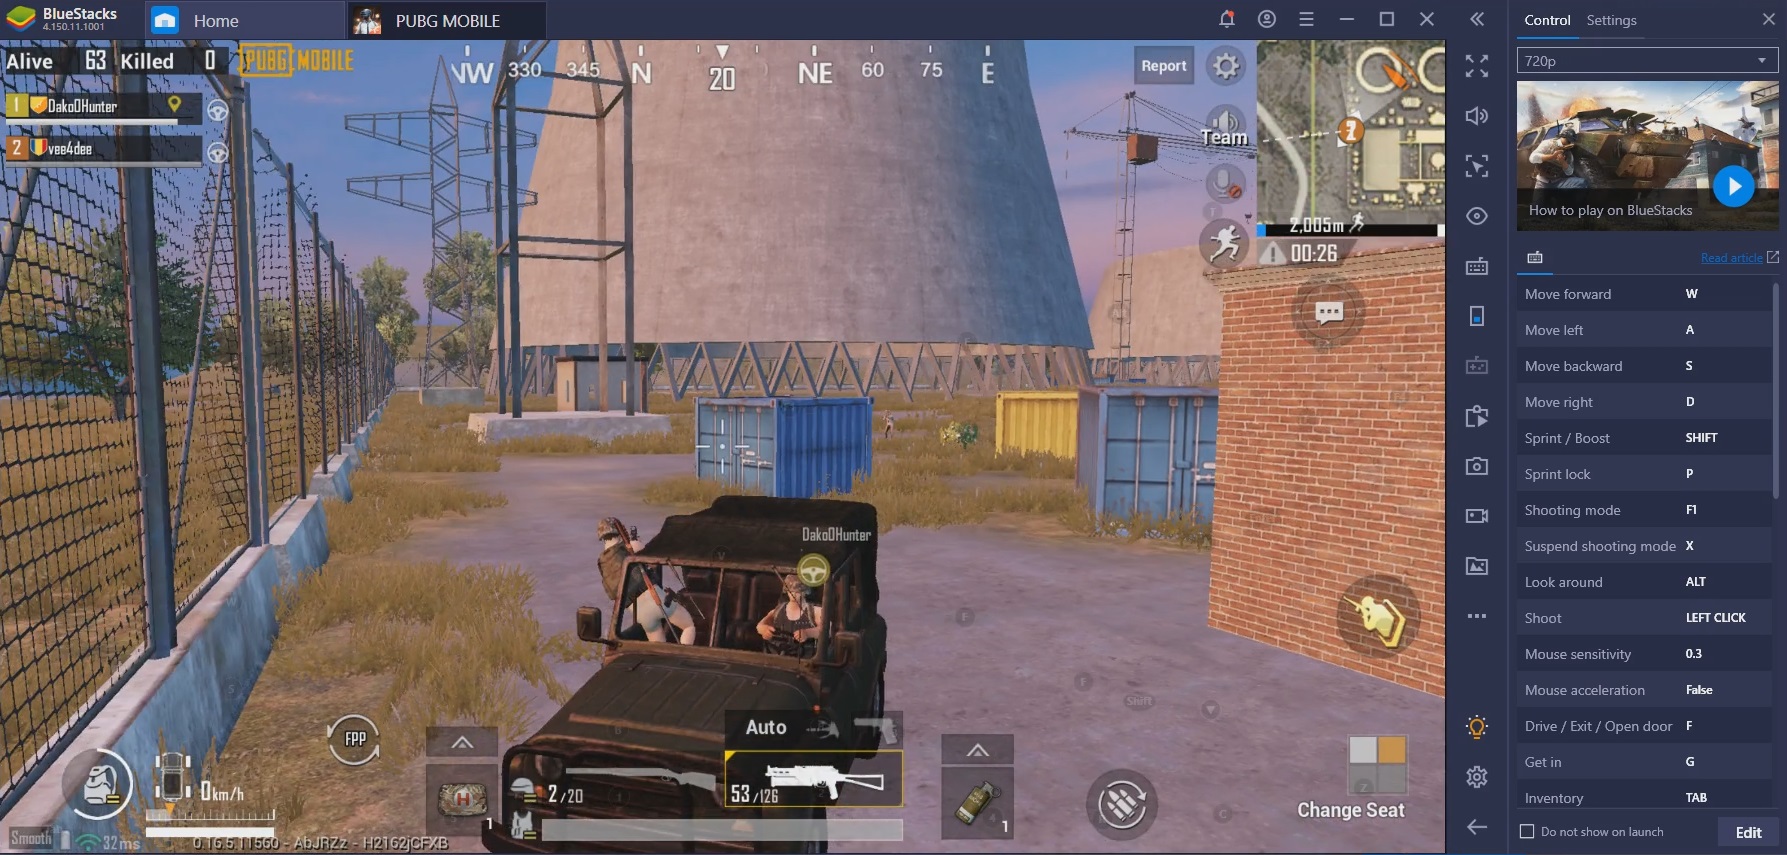 PUBG Mobile on PC: Duos and Squads Guide